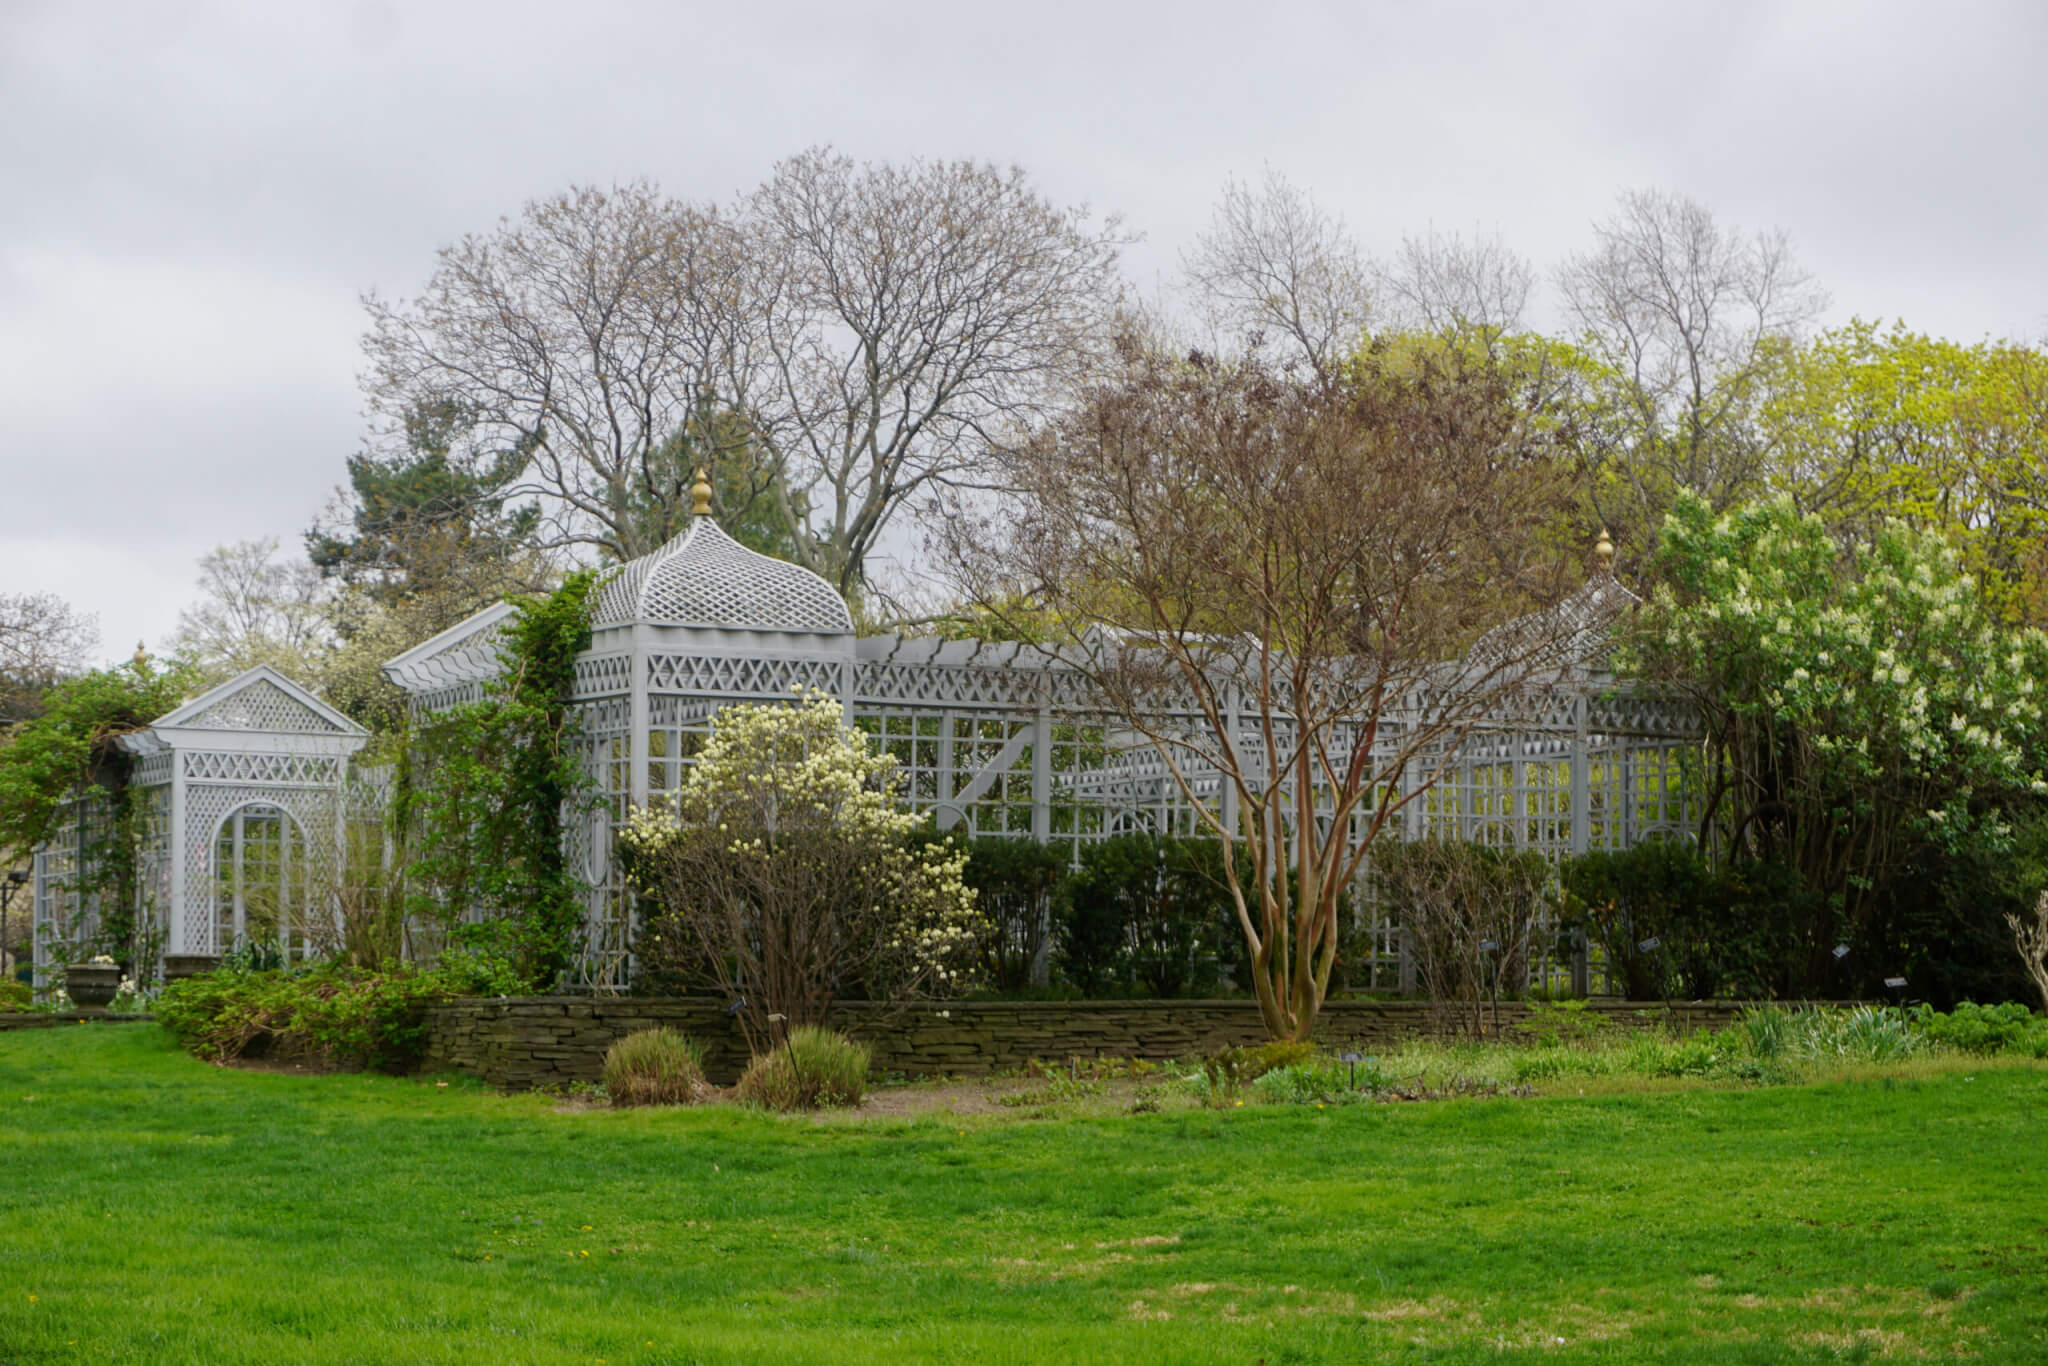 Staten Island, New York, USA: The Victorian-style greenhouse at the Snug Harbor Cultural Center and Botanical Garden.